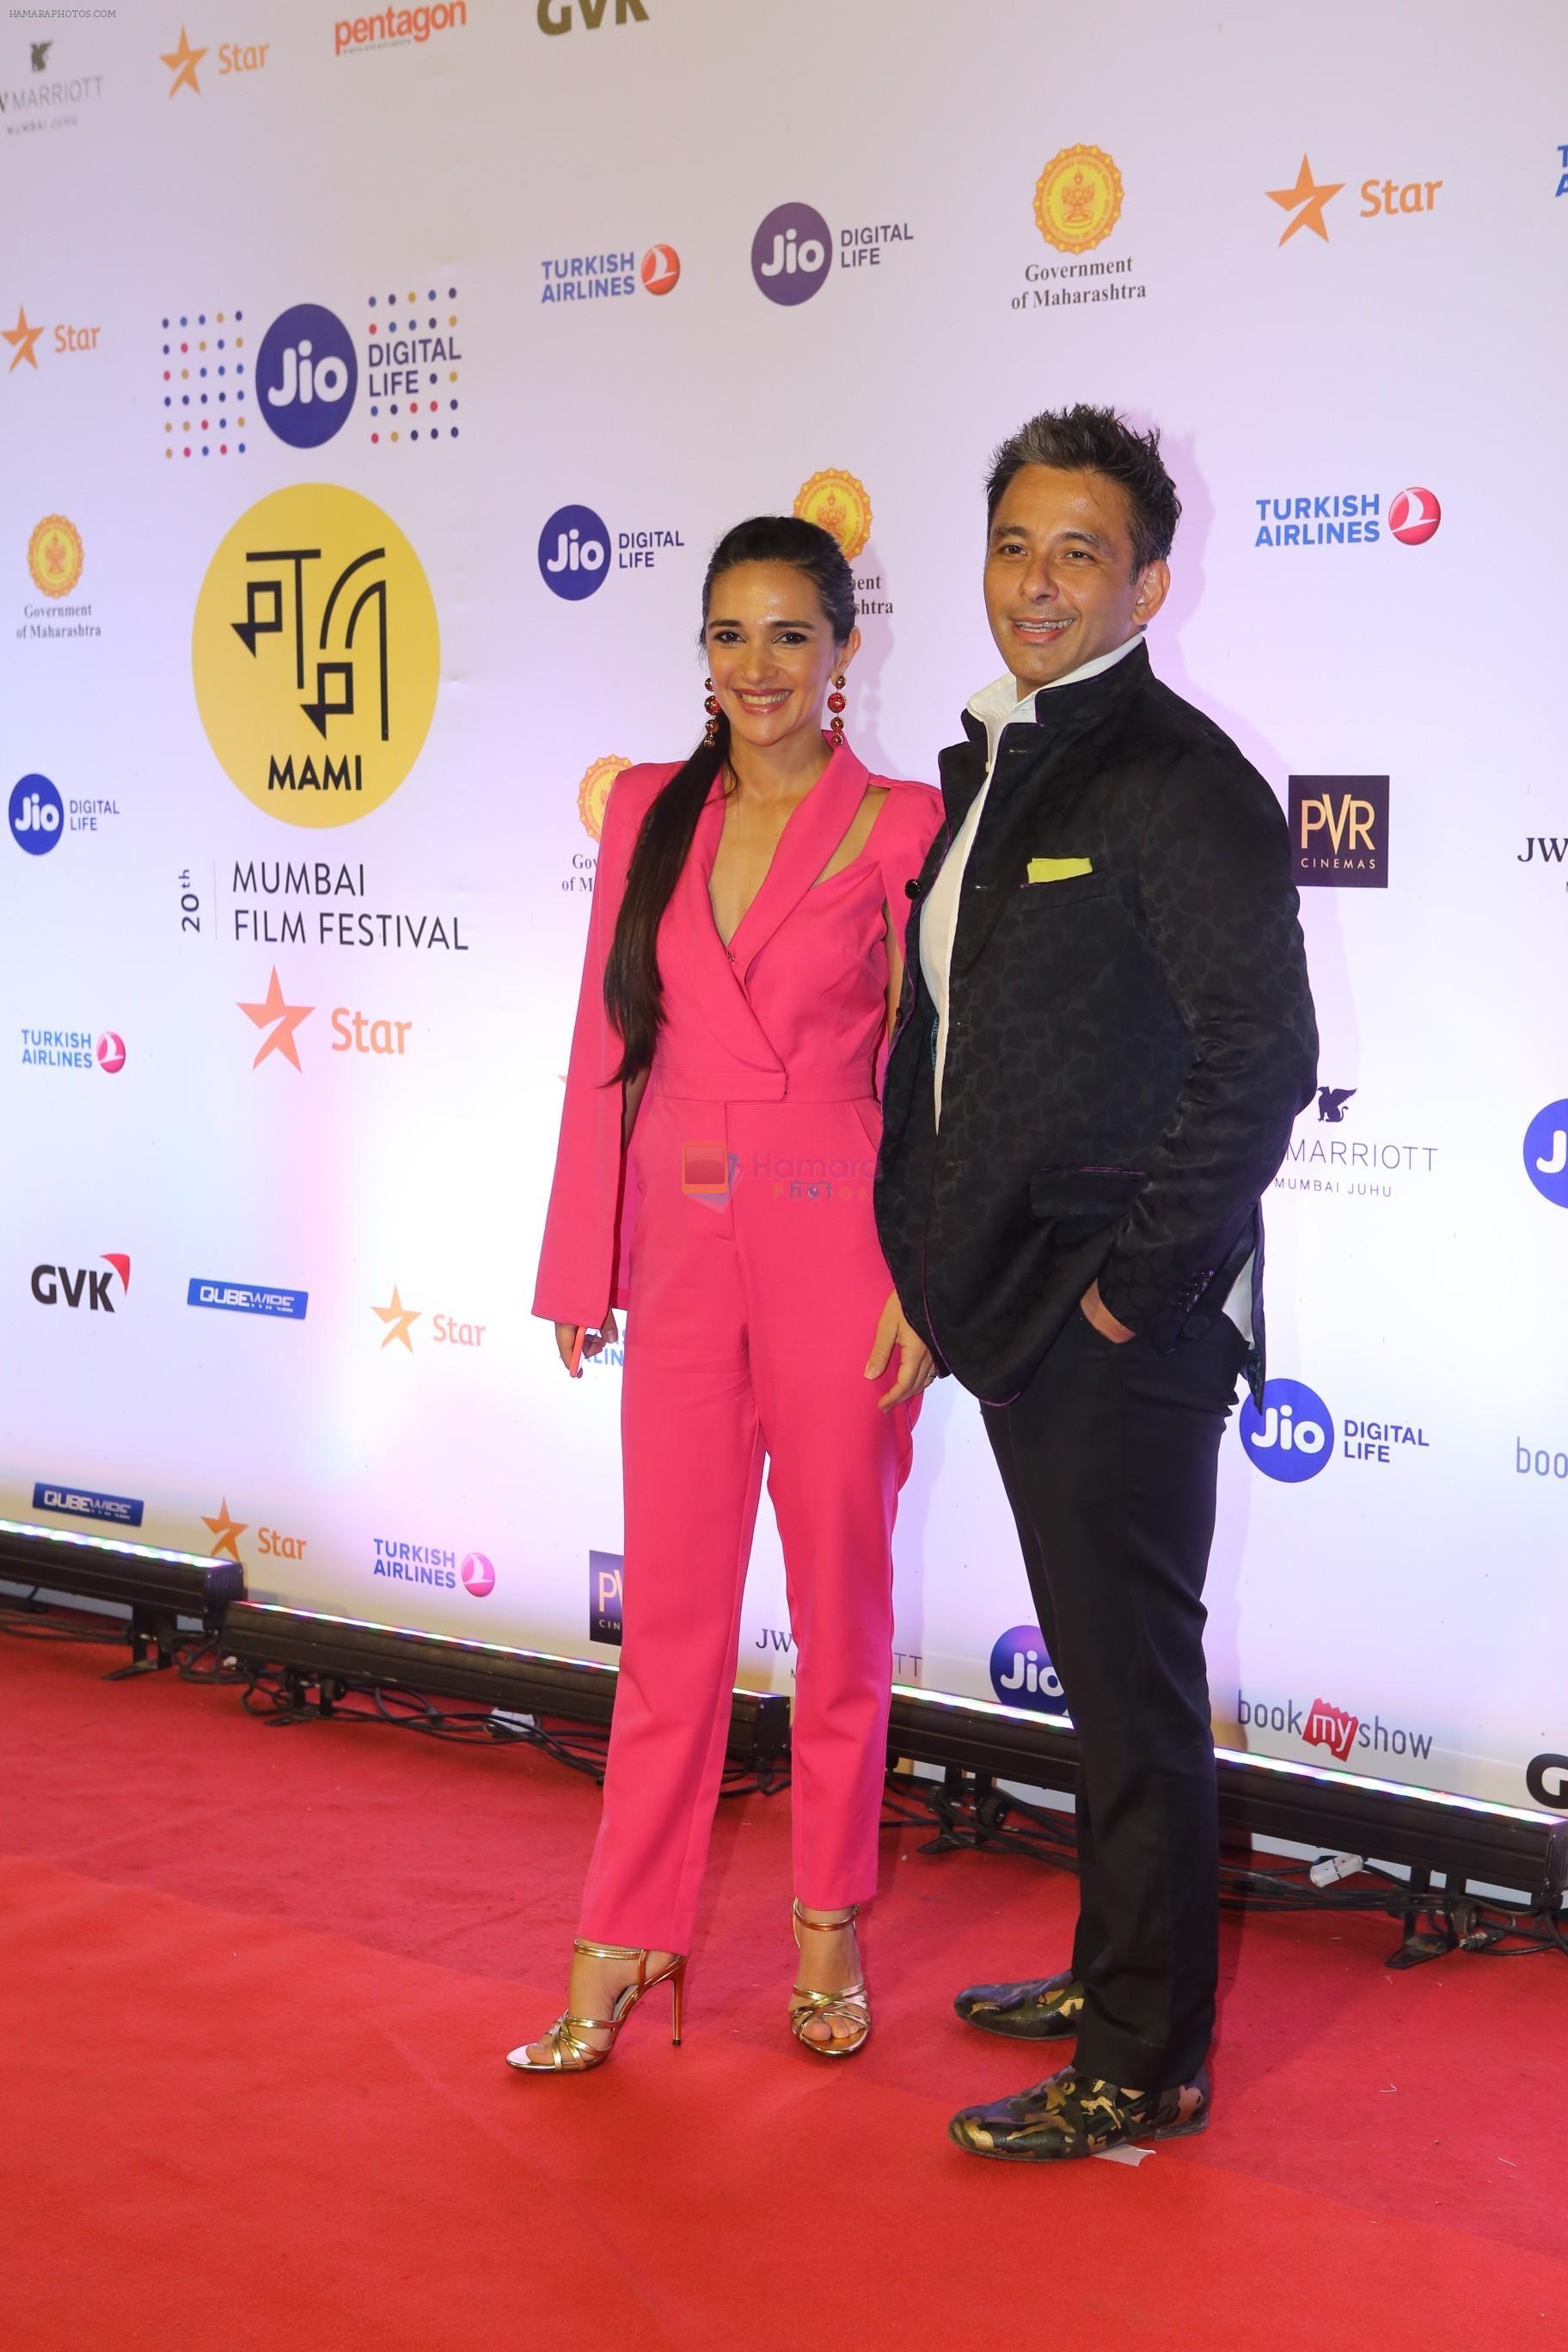 Tara Sharma at the Opening ceremony of Mami film festival in Gateway of India on 25th Oct 2018